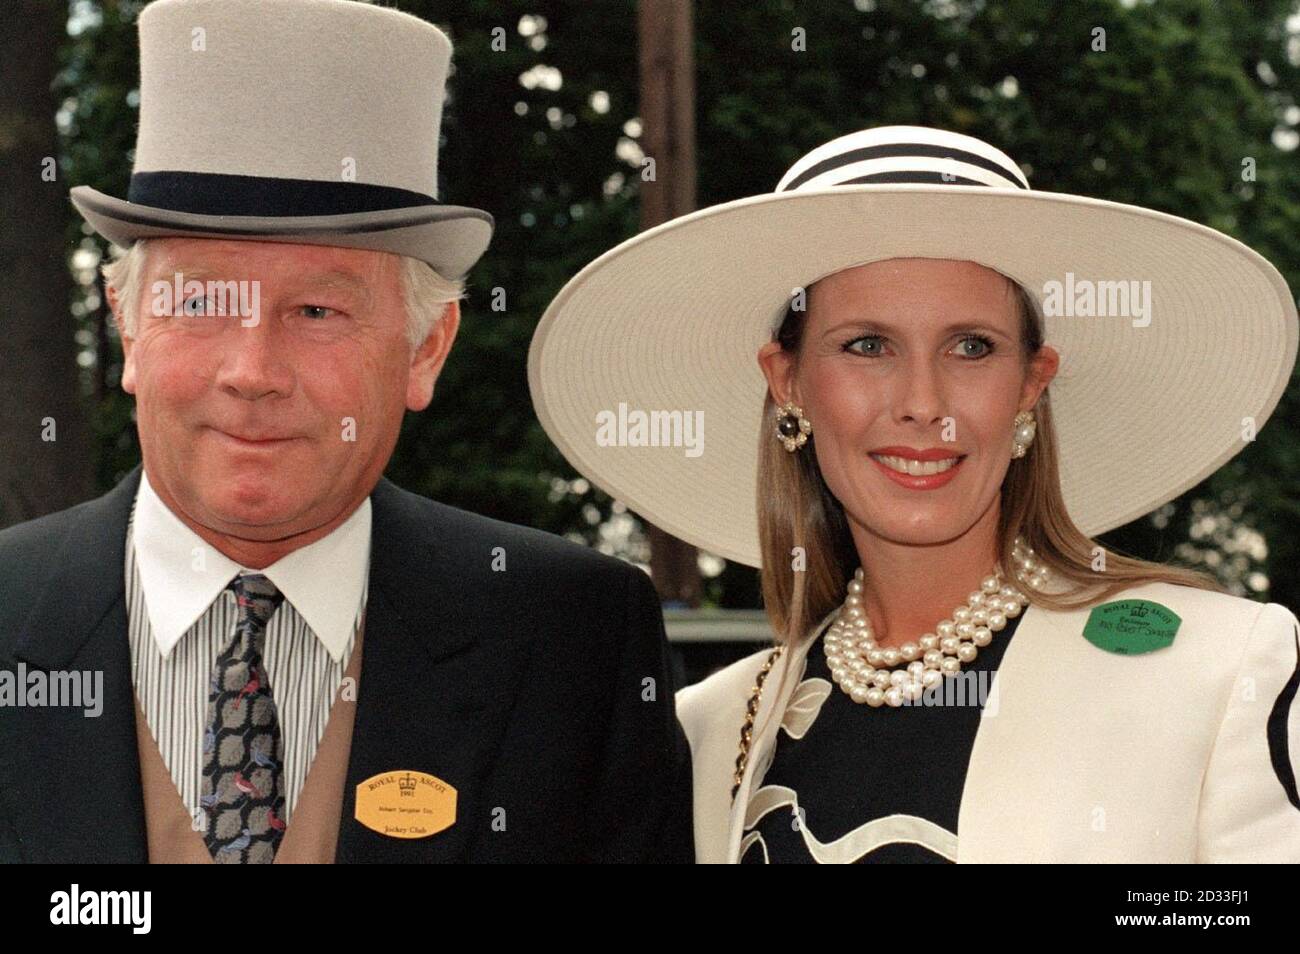 Robert Sangster and his wife Susan at Royal Ascot.  *08/04/04: Robert Sangster died, aged 67, after a long battle with cancer, the Daily Telegraph reported. Sangster dominated the British racing scene in the late 1970s and early 1980s, and enjoyed phenomenal success on the international stage. Stock Photo